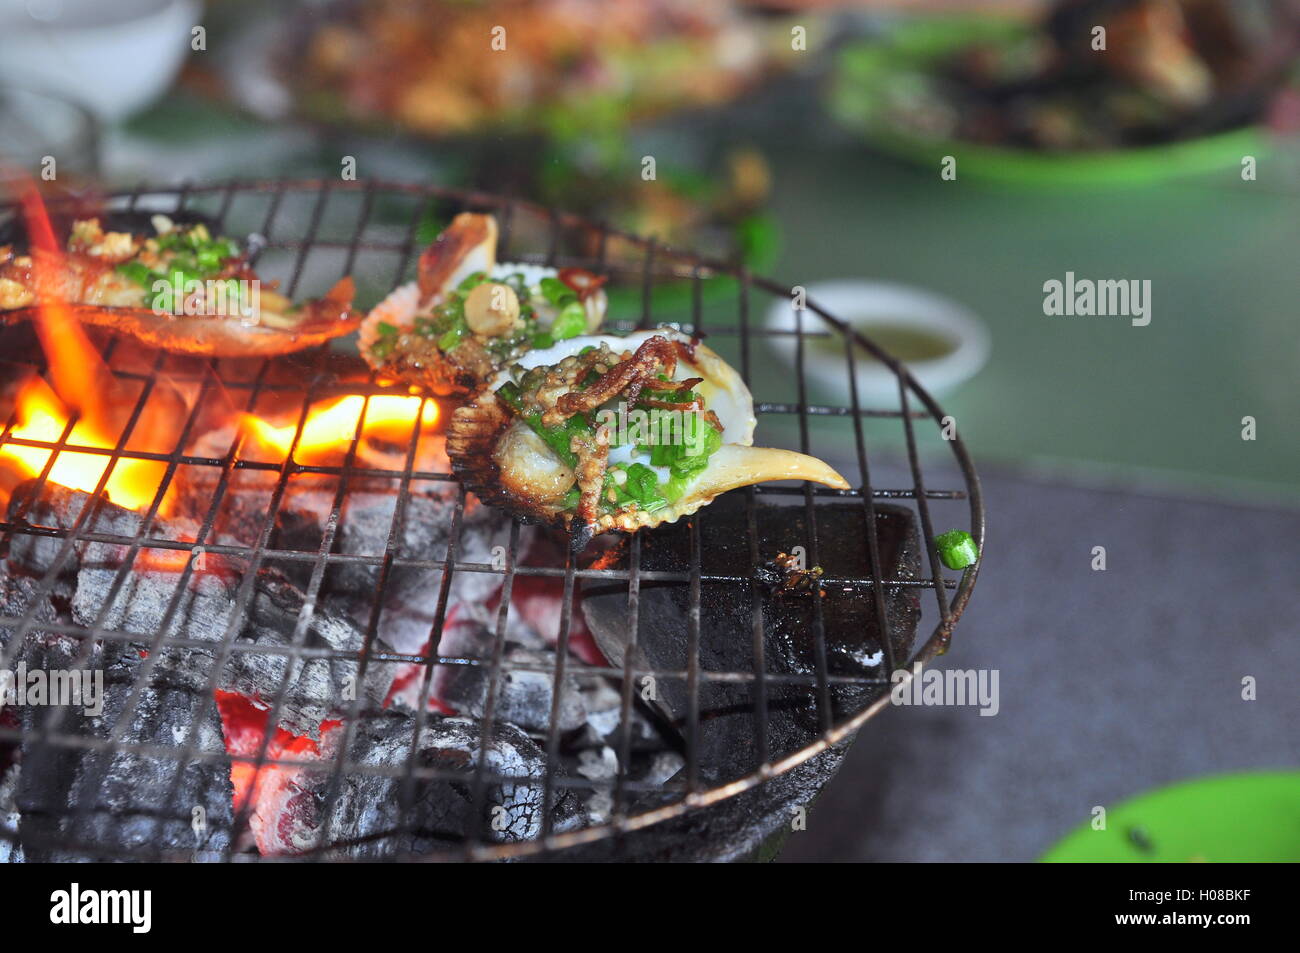 Grilling shellfish and seafood on hot fire Stock Photo